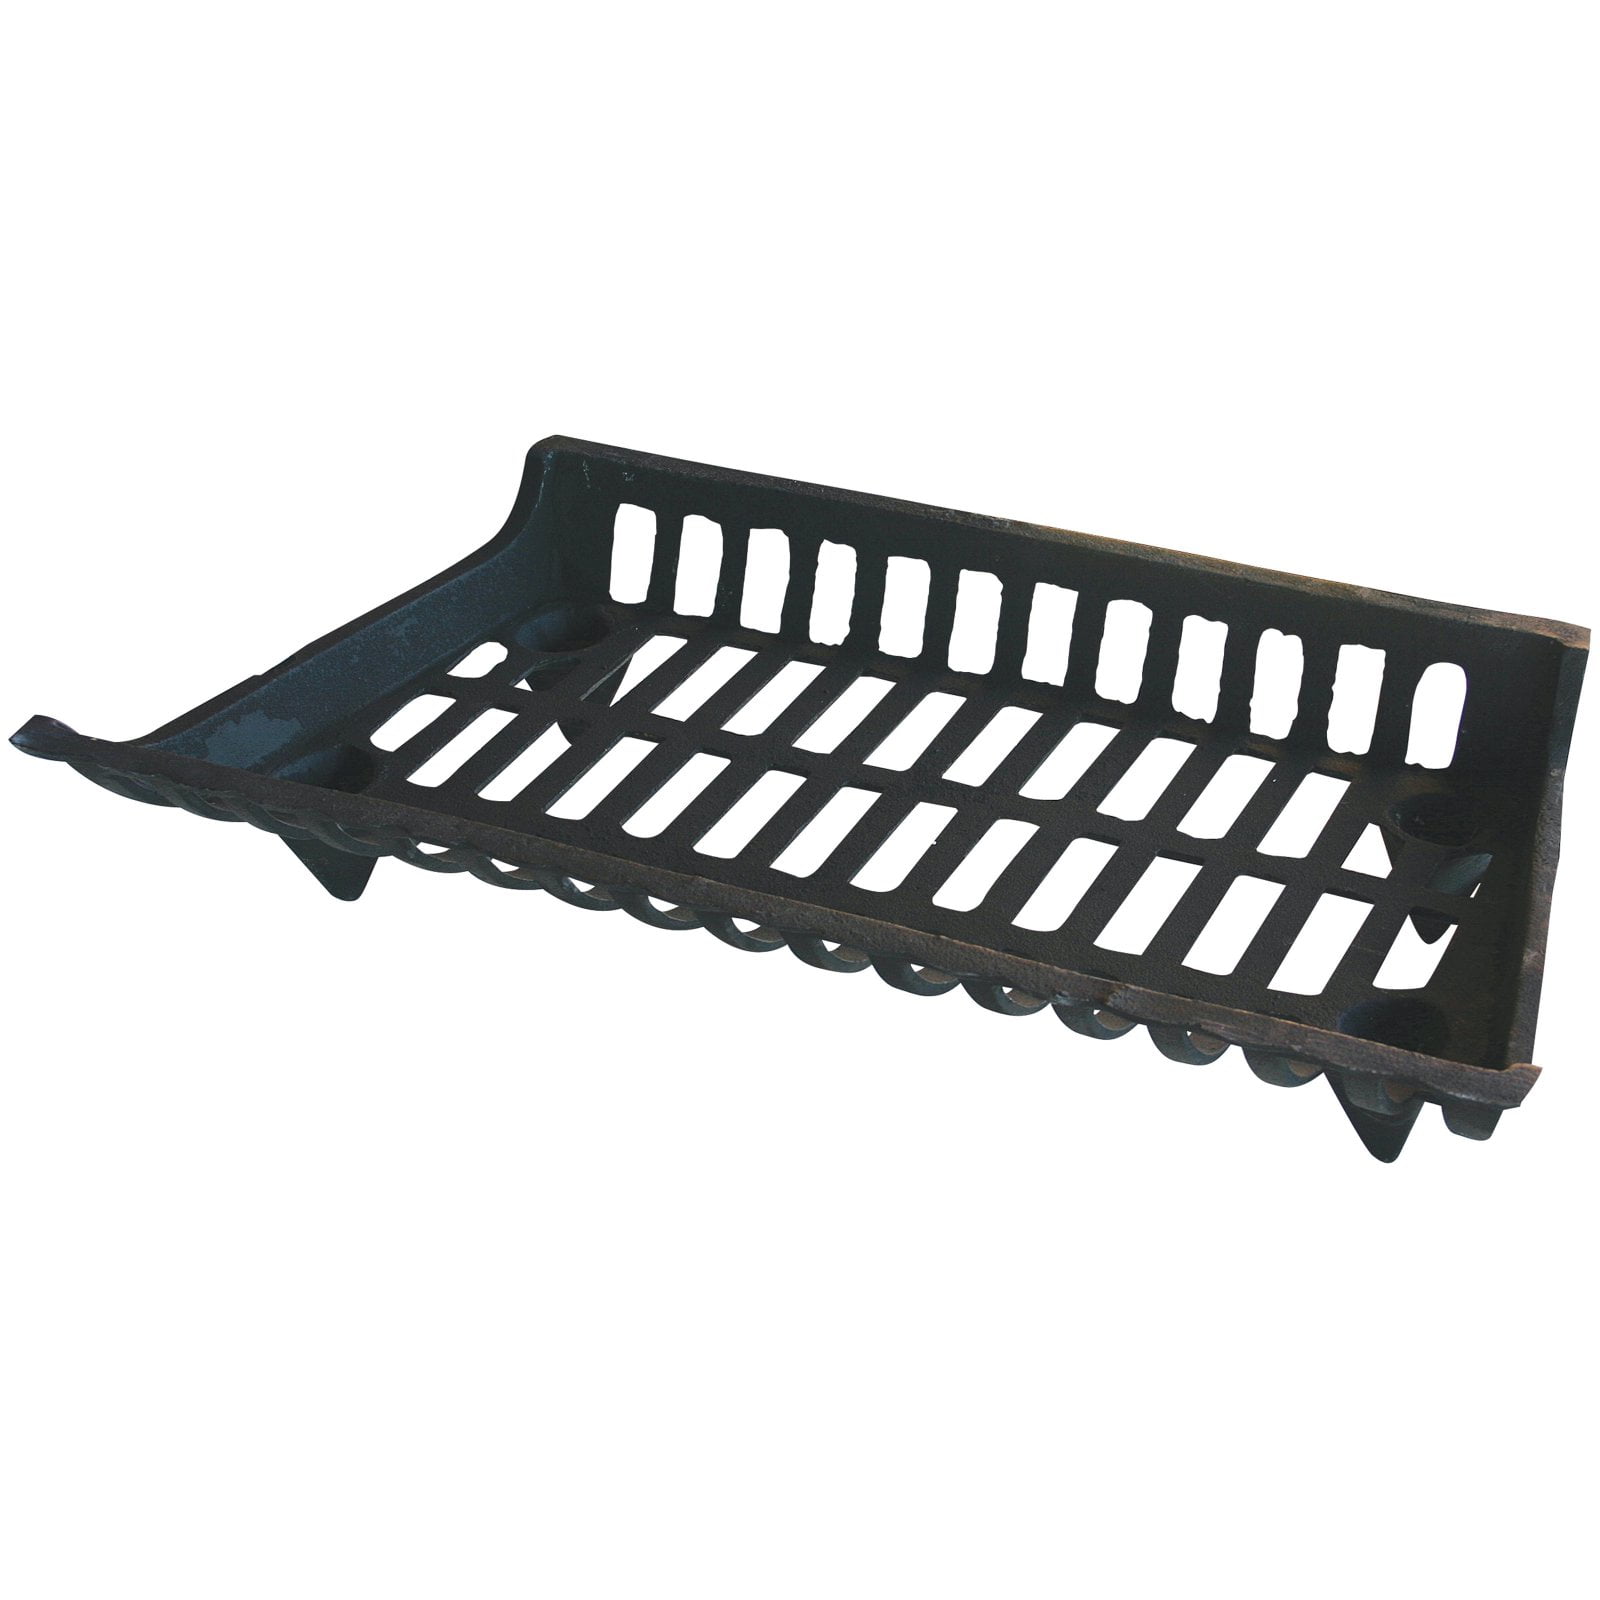 Cast-Iron Fireplace Grate FG-1003-1 Home Impressions Zero Clearance 27 In 